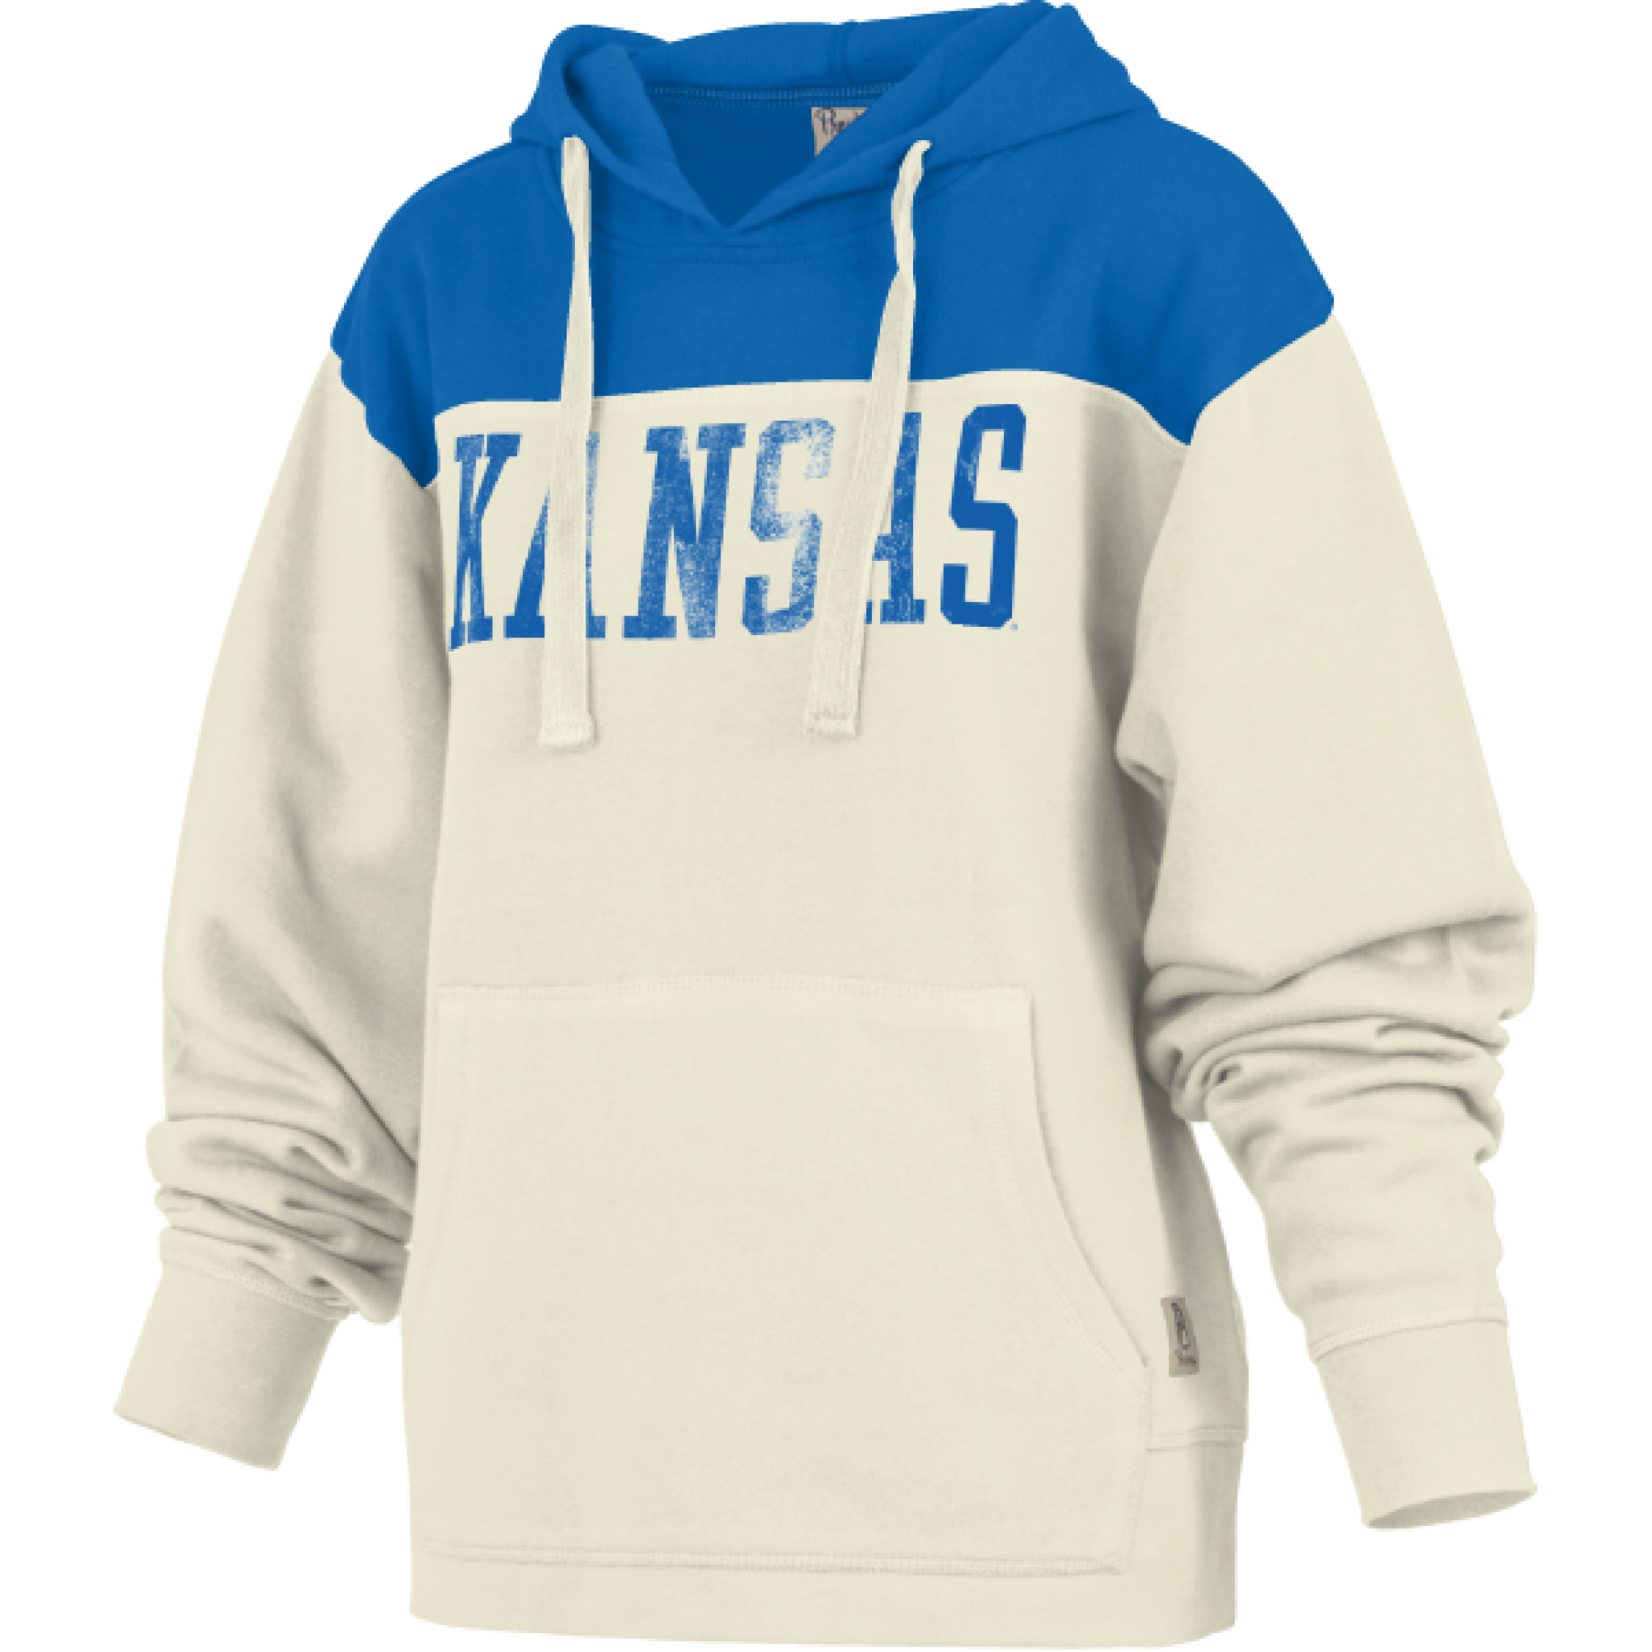 The College Hoodie